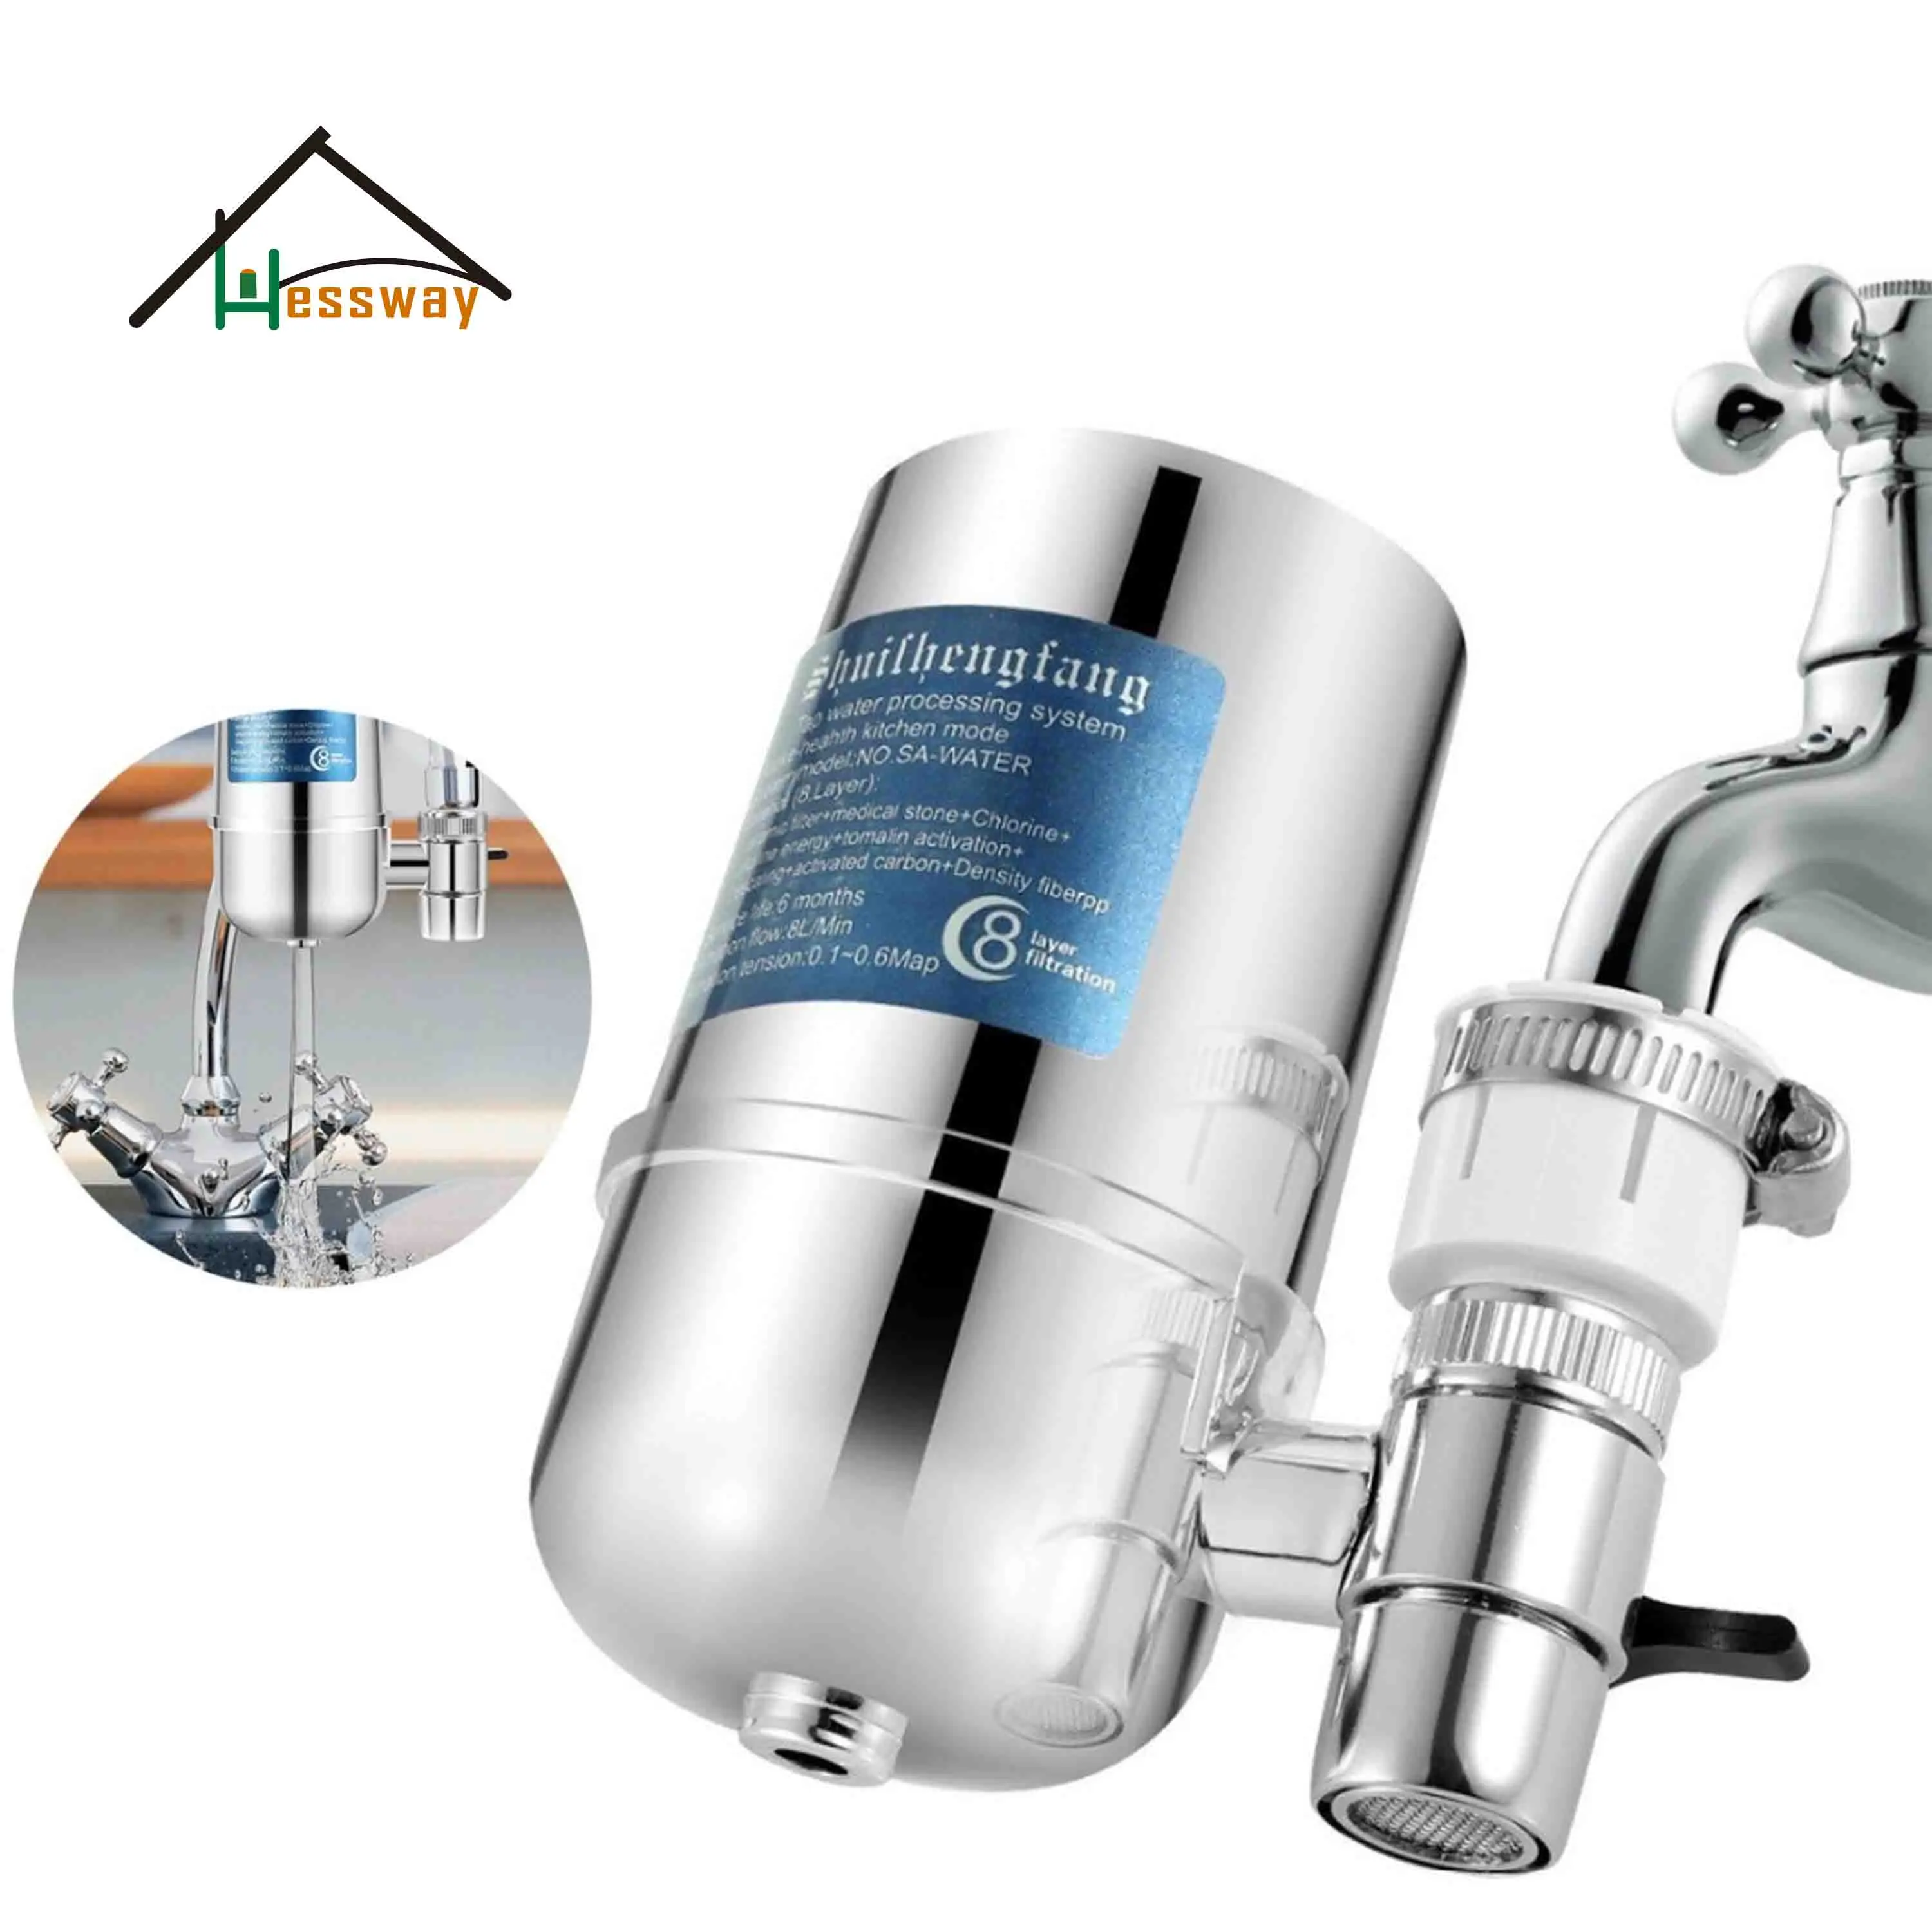 HESSWAY Carbon Filter Food Grade Material Water Purifier System for Faucet Water Filter Removal Rust Bacteria 8 layer purification ceramics tap water processing system tap water purifier for 6l household kitchen removal rust bacteria